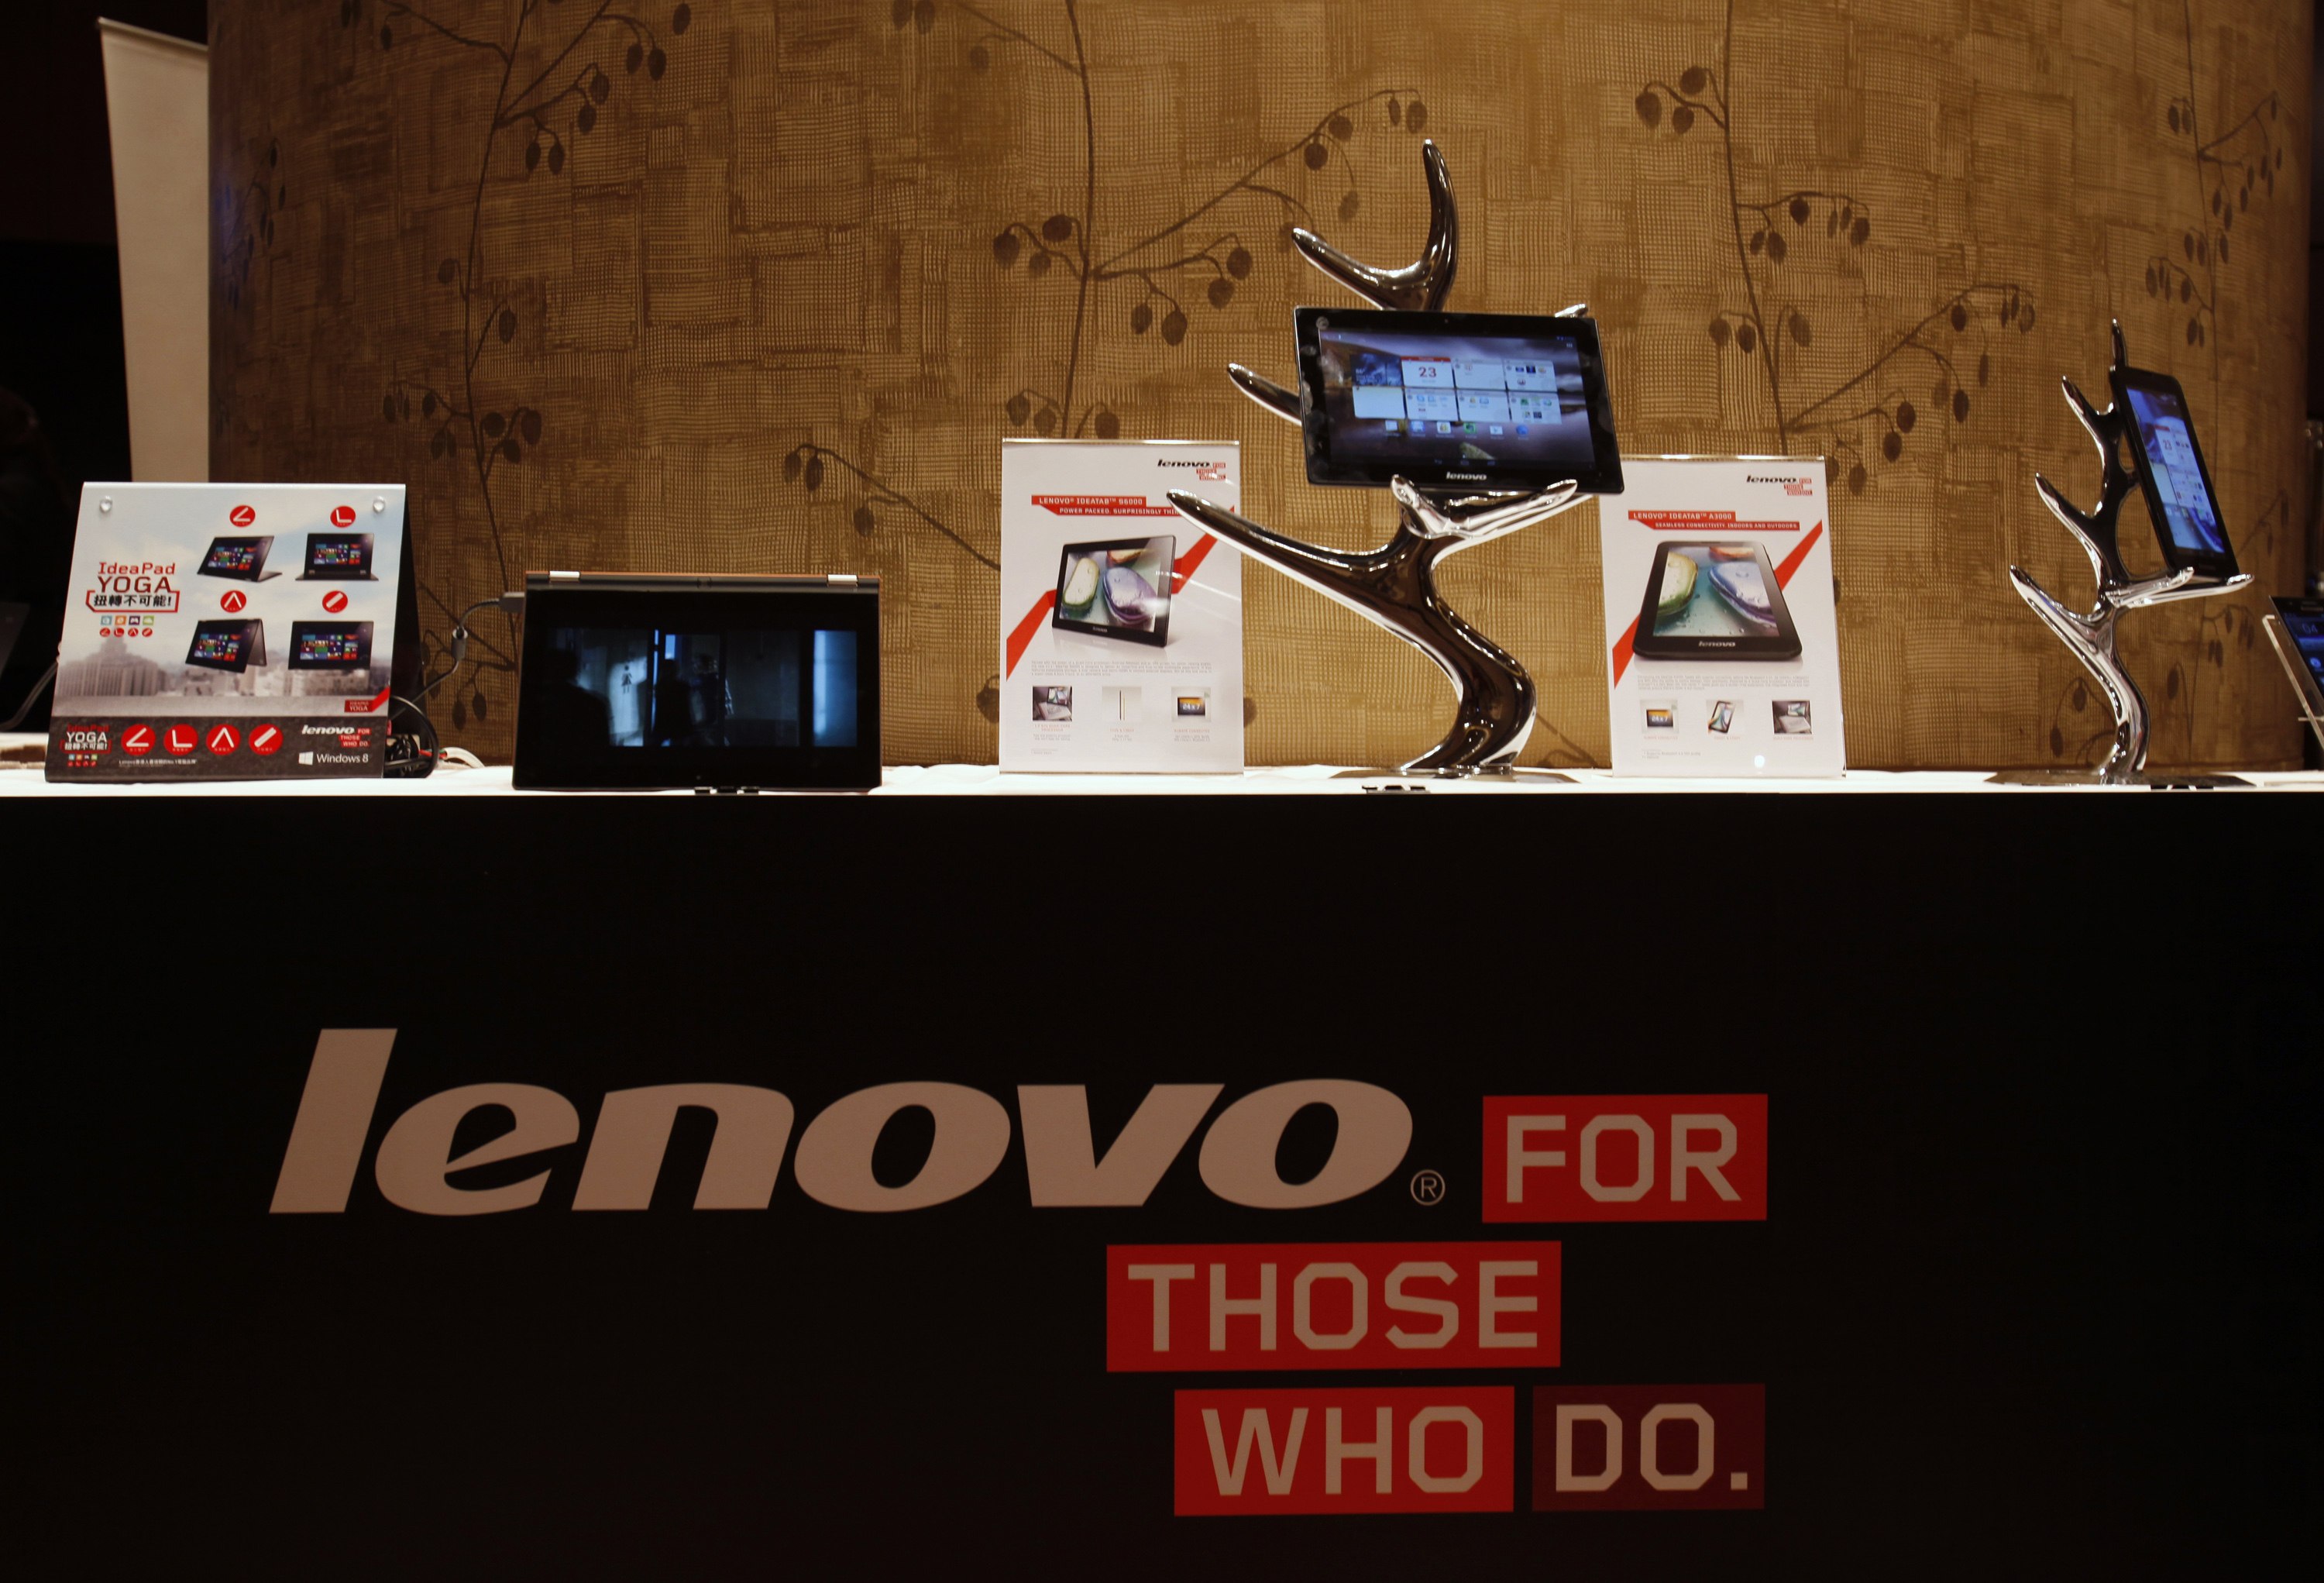 Lenovo tablets and mobile phones are displayed during a news conference in Hong Kong. Photo: Reuters